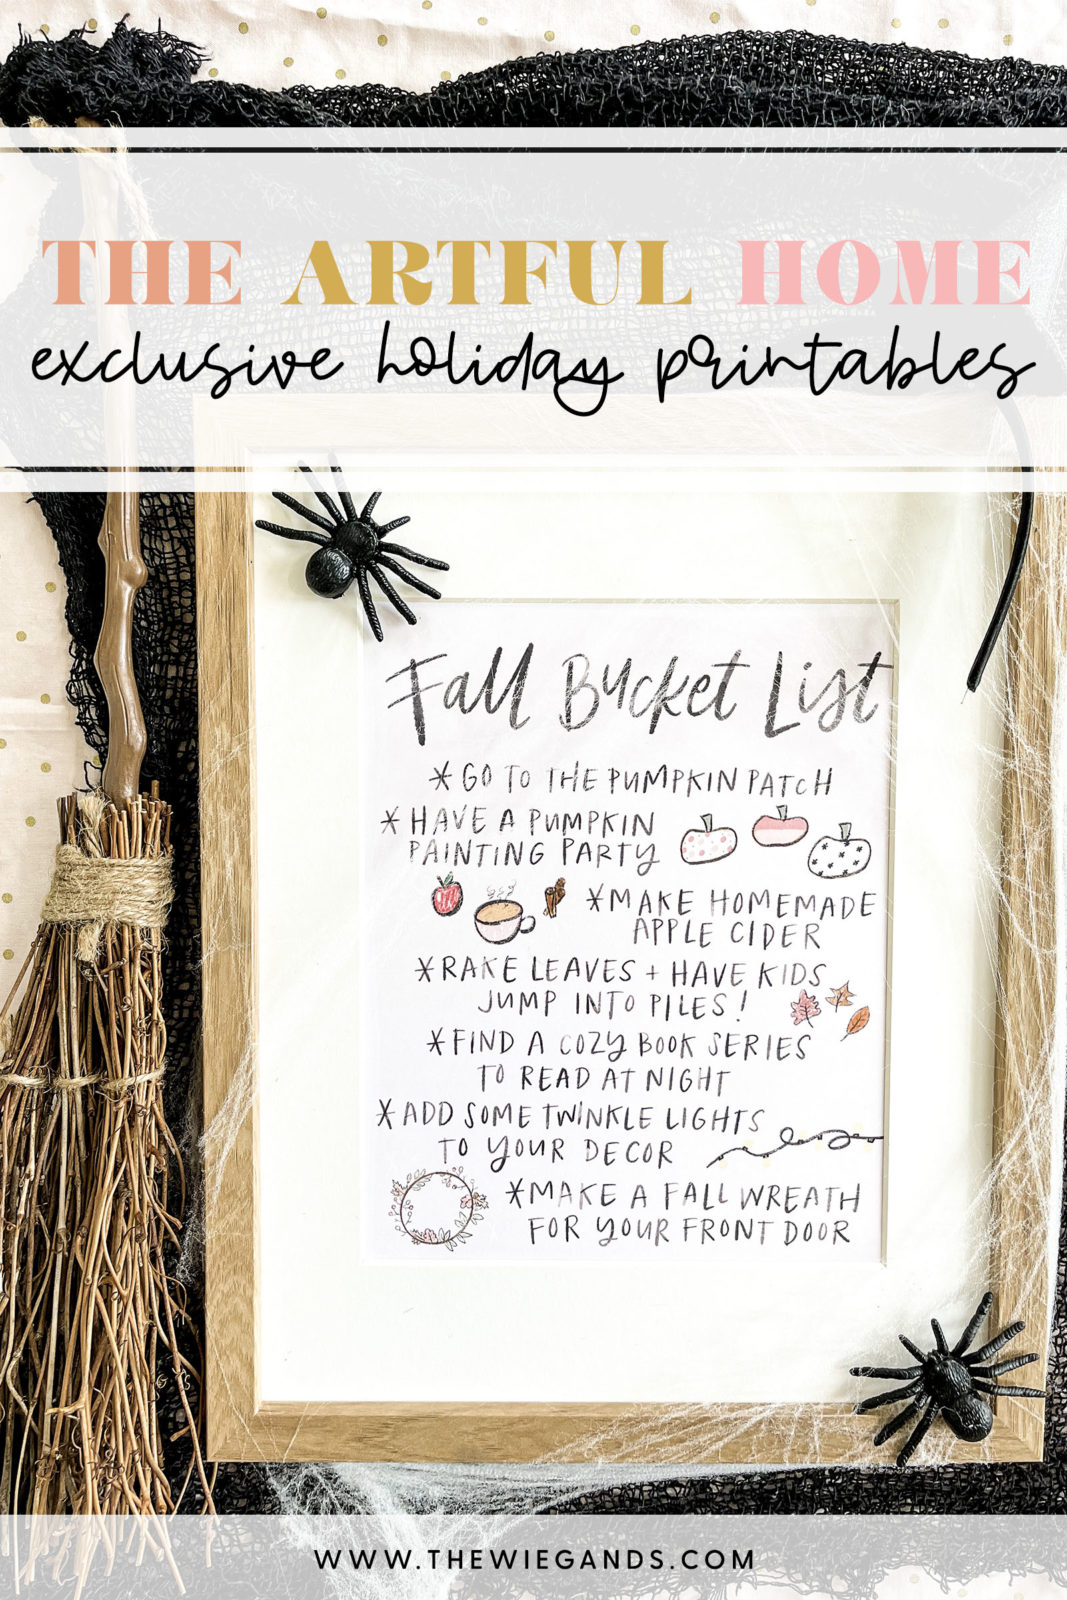 Holiday Printables! Exclusive at The Artful Home - Casey Wiegand of The ...